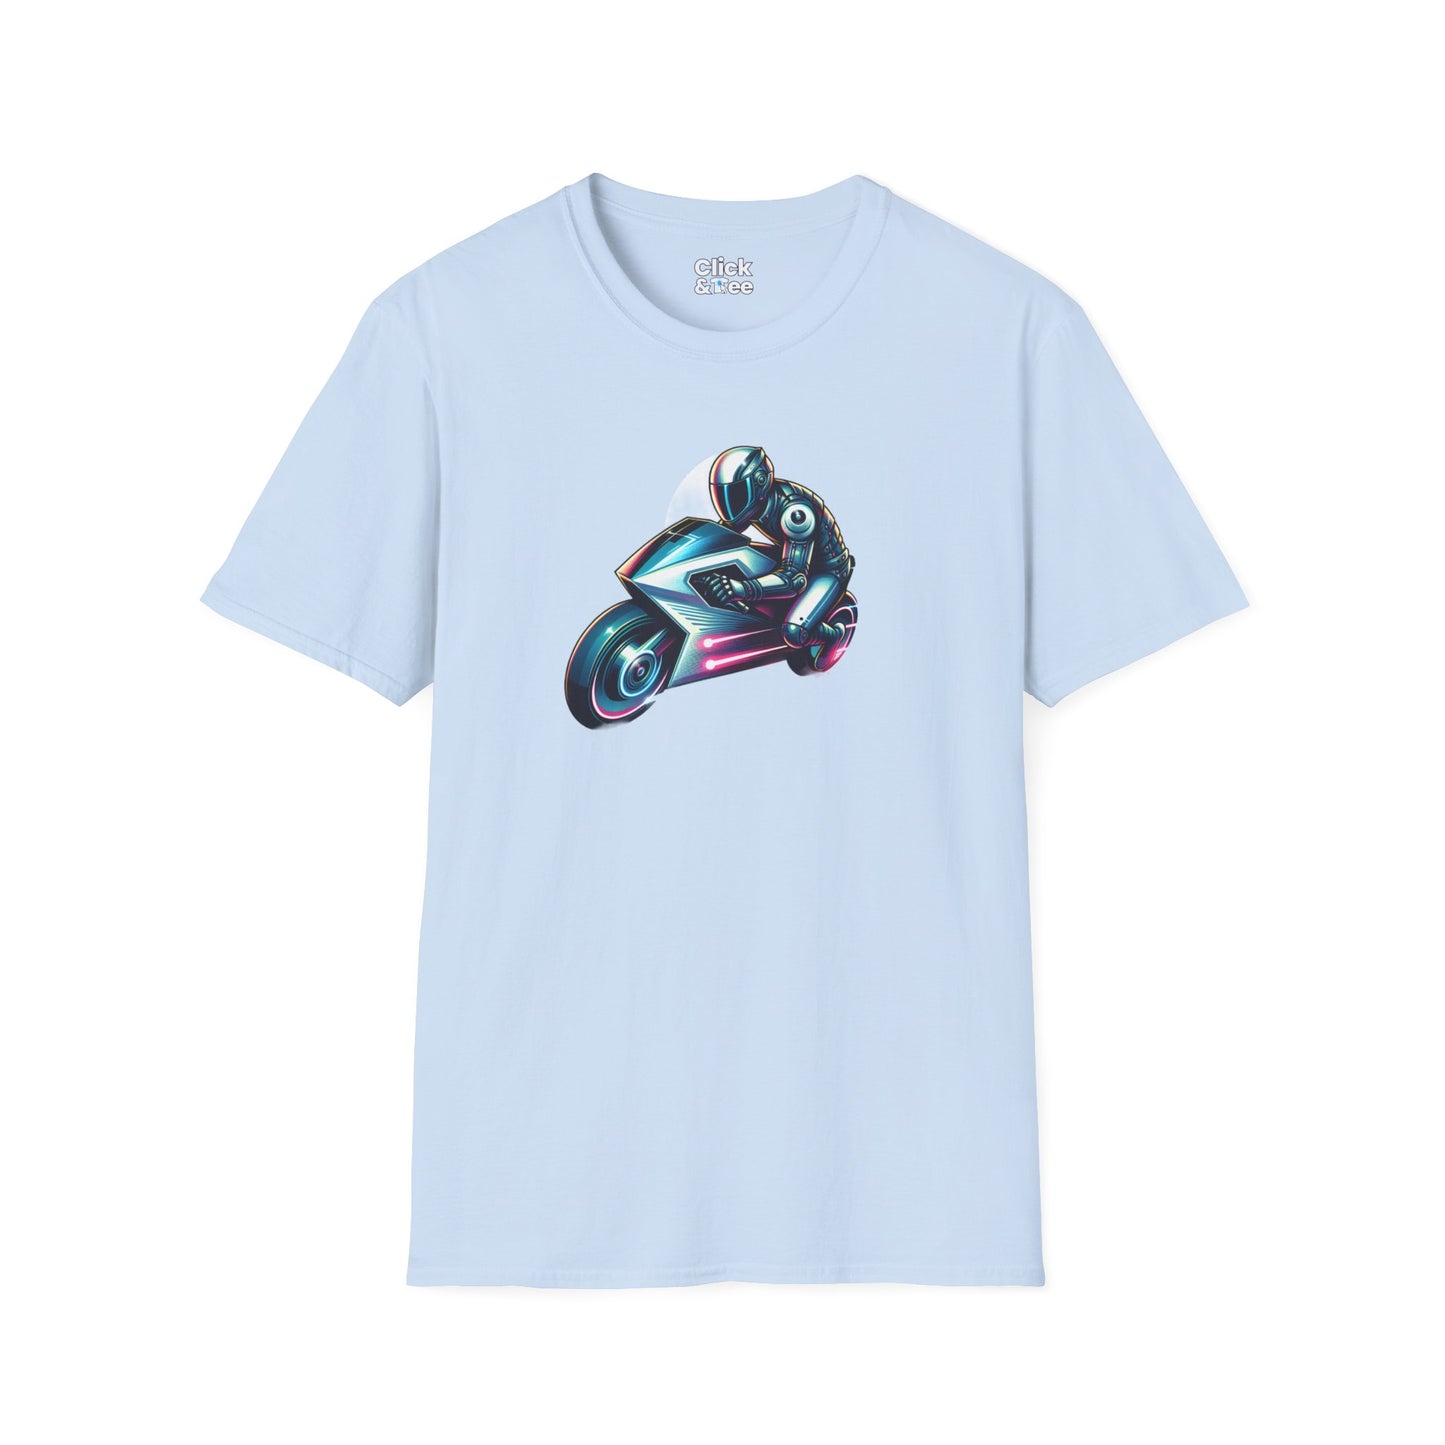 Synthwave T-Shirt - Futuristic Racer Riding a futuristic light bike - Synthwave Style T-Shirt